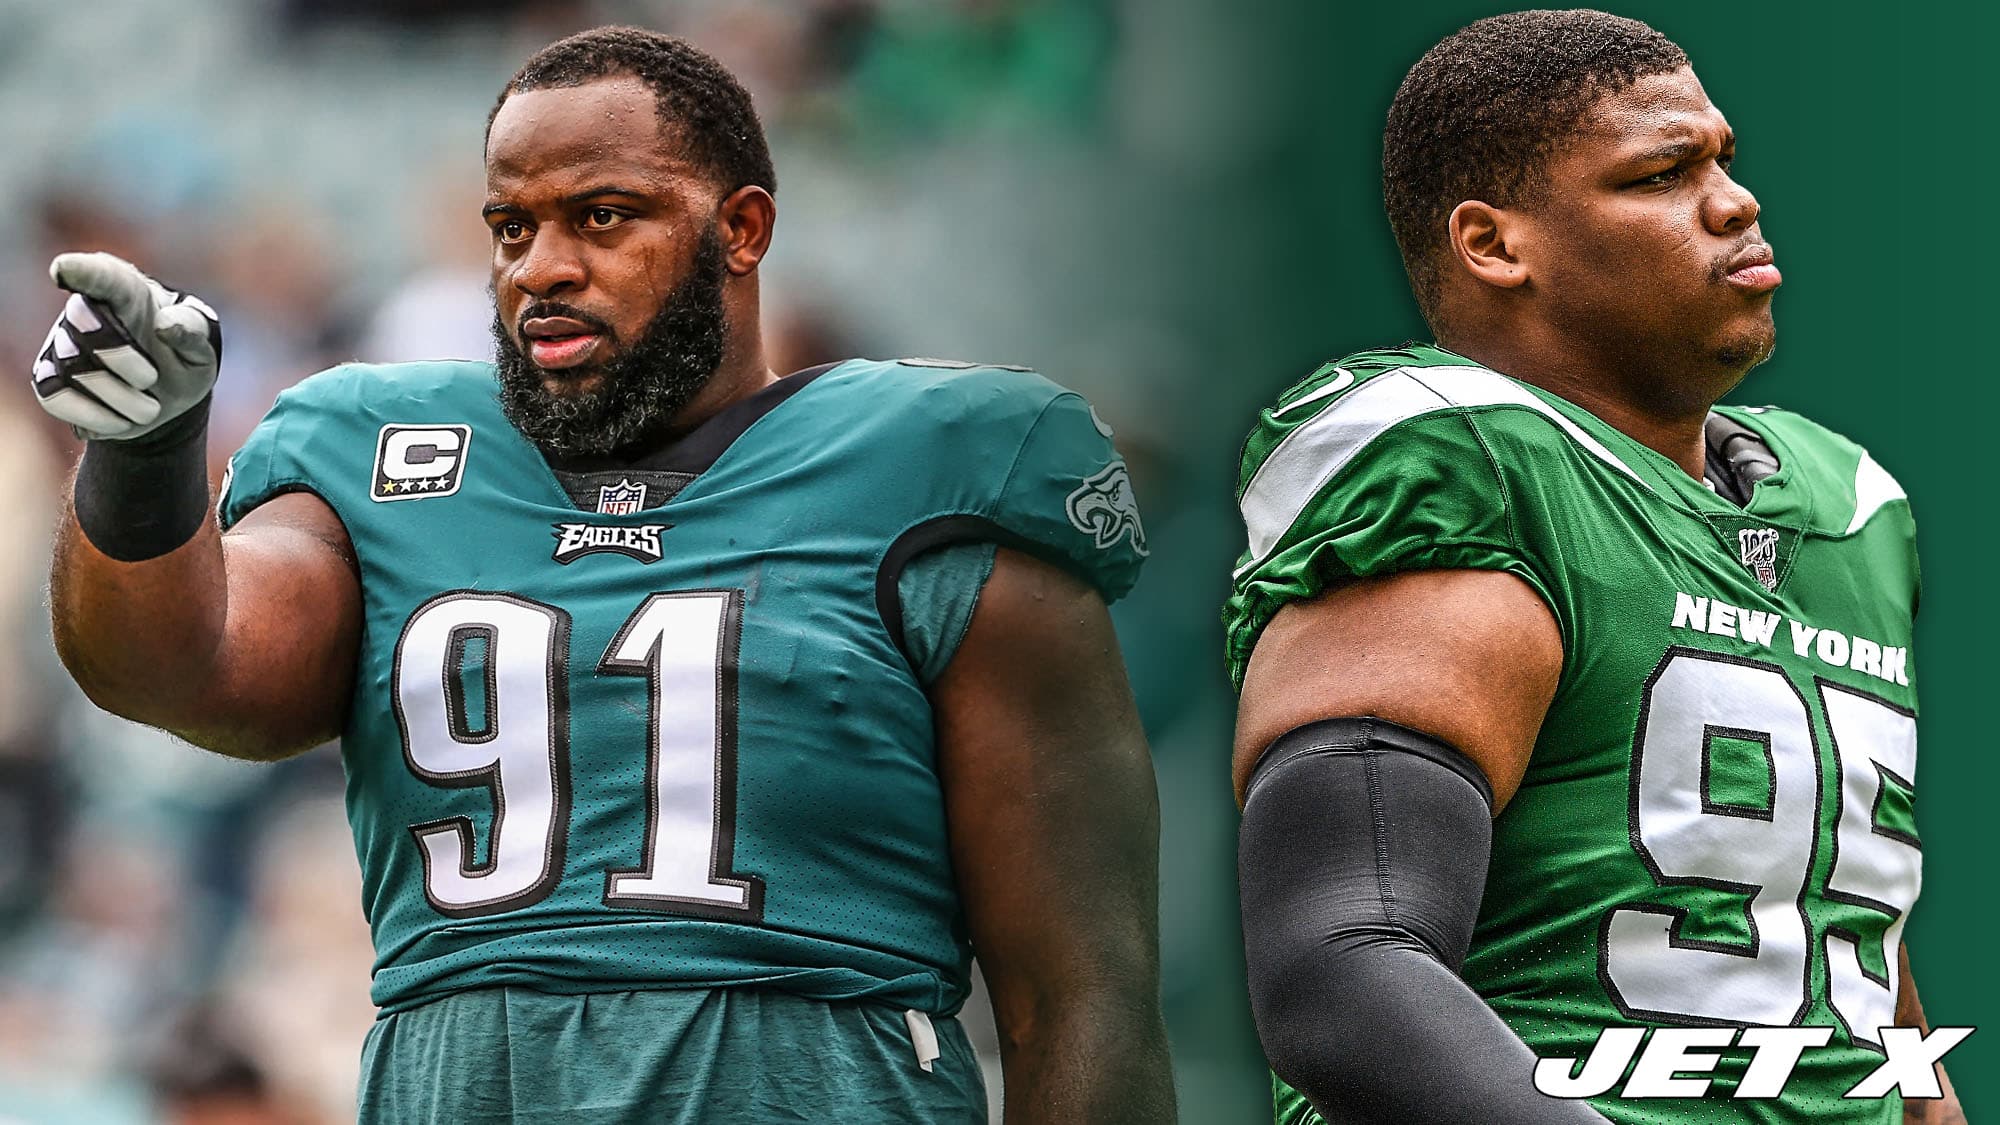 Fletcher Cox is one of many star NFL DTs whose second season was not as good as Quinnen Williams'.